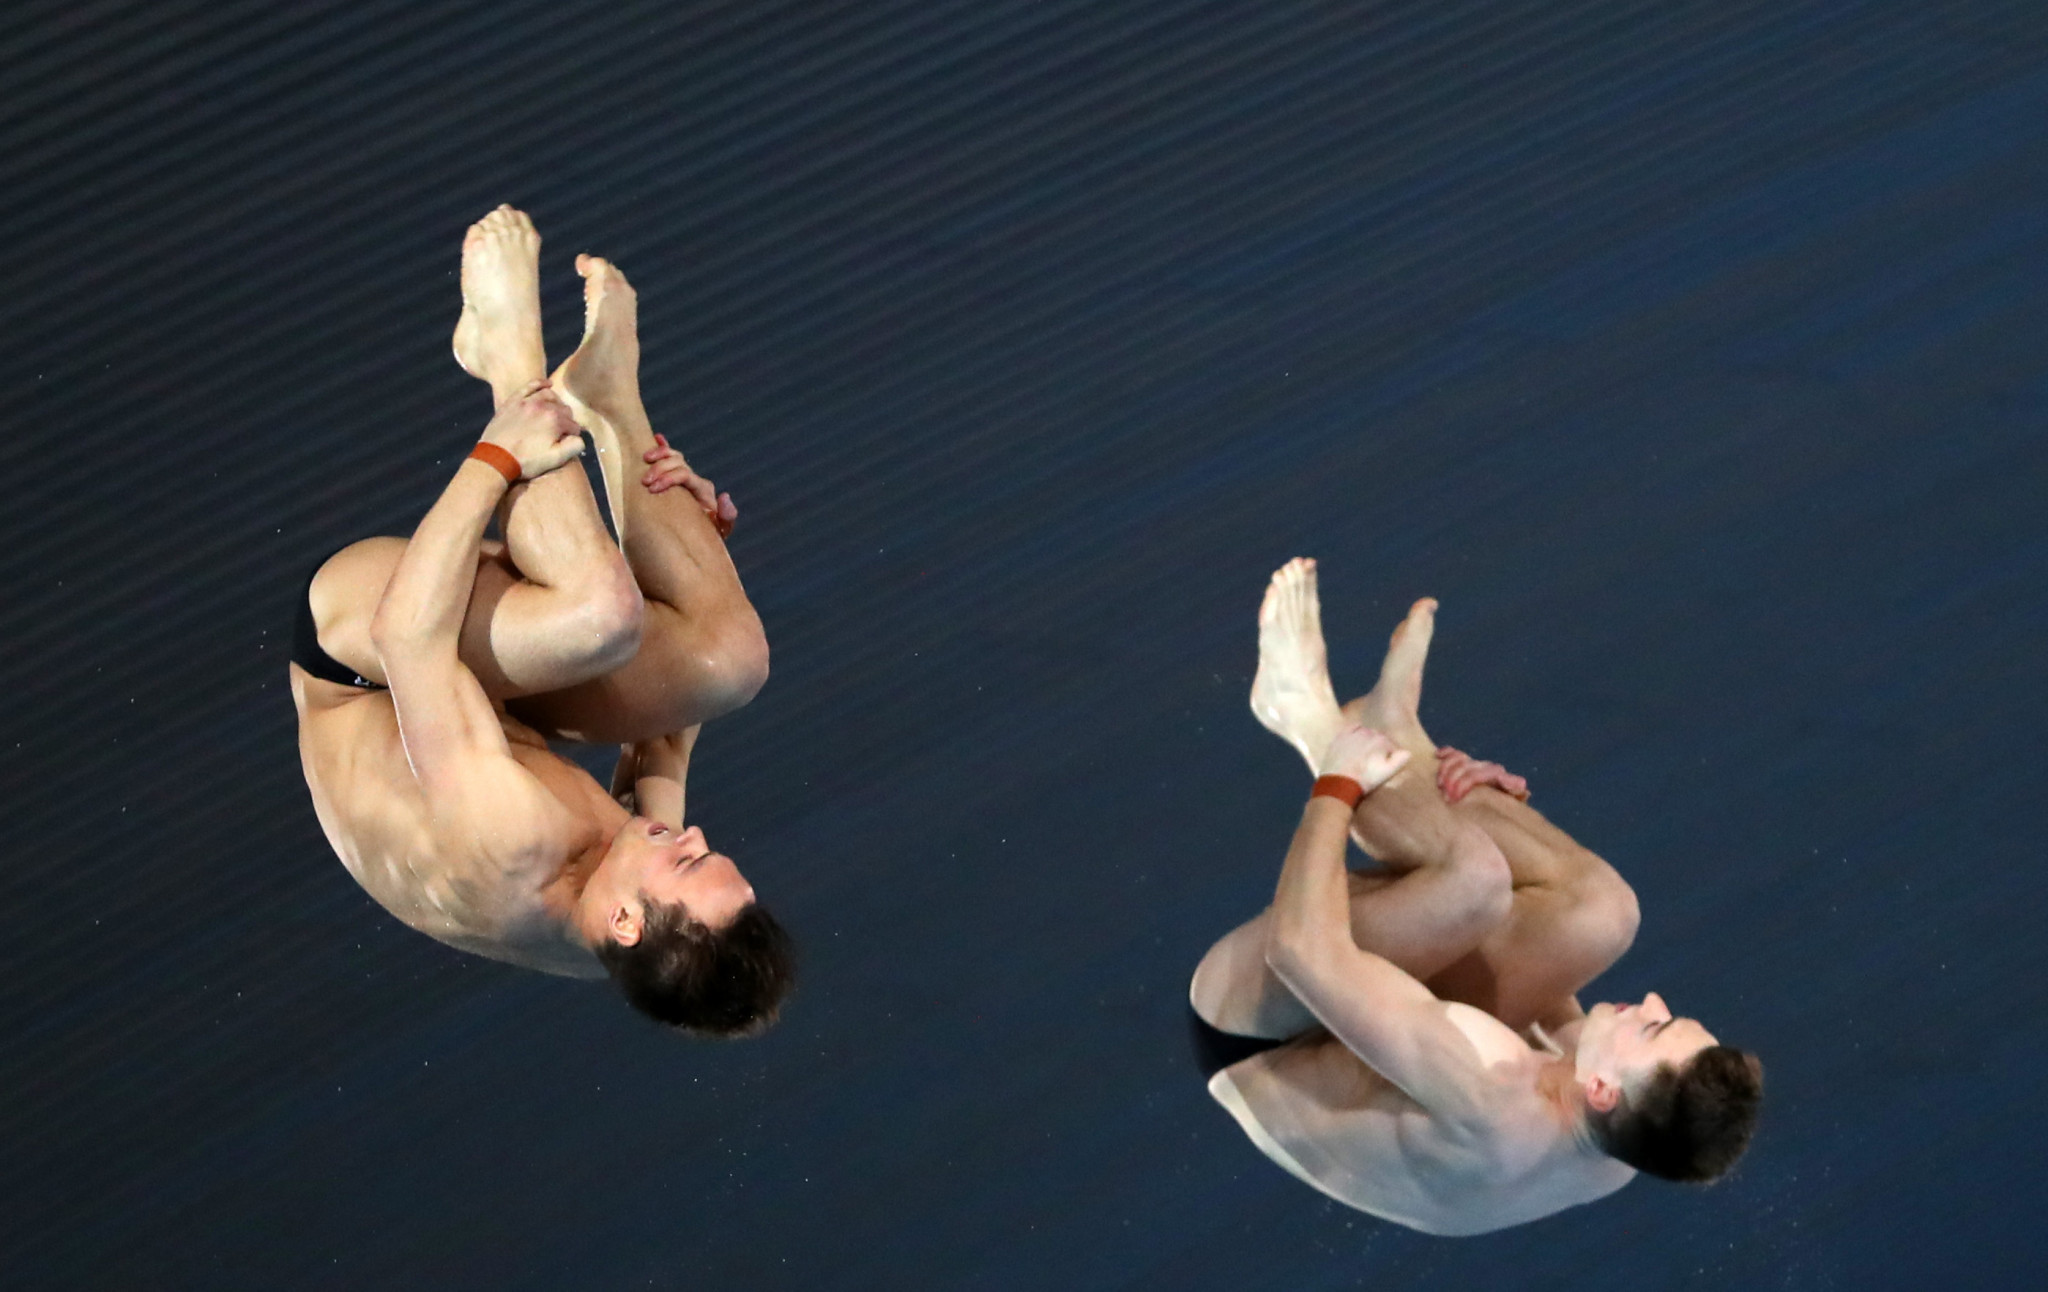 Daley and Lee deliver home gold at FINA Diving World Series in London